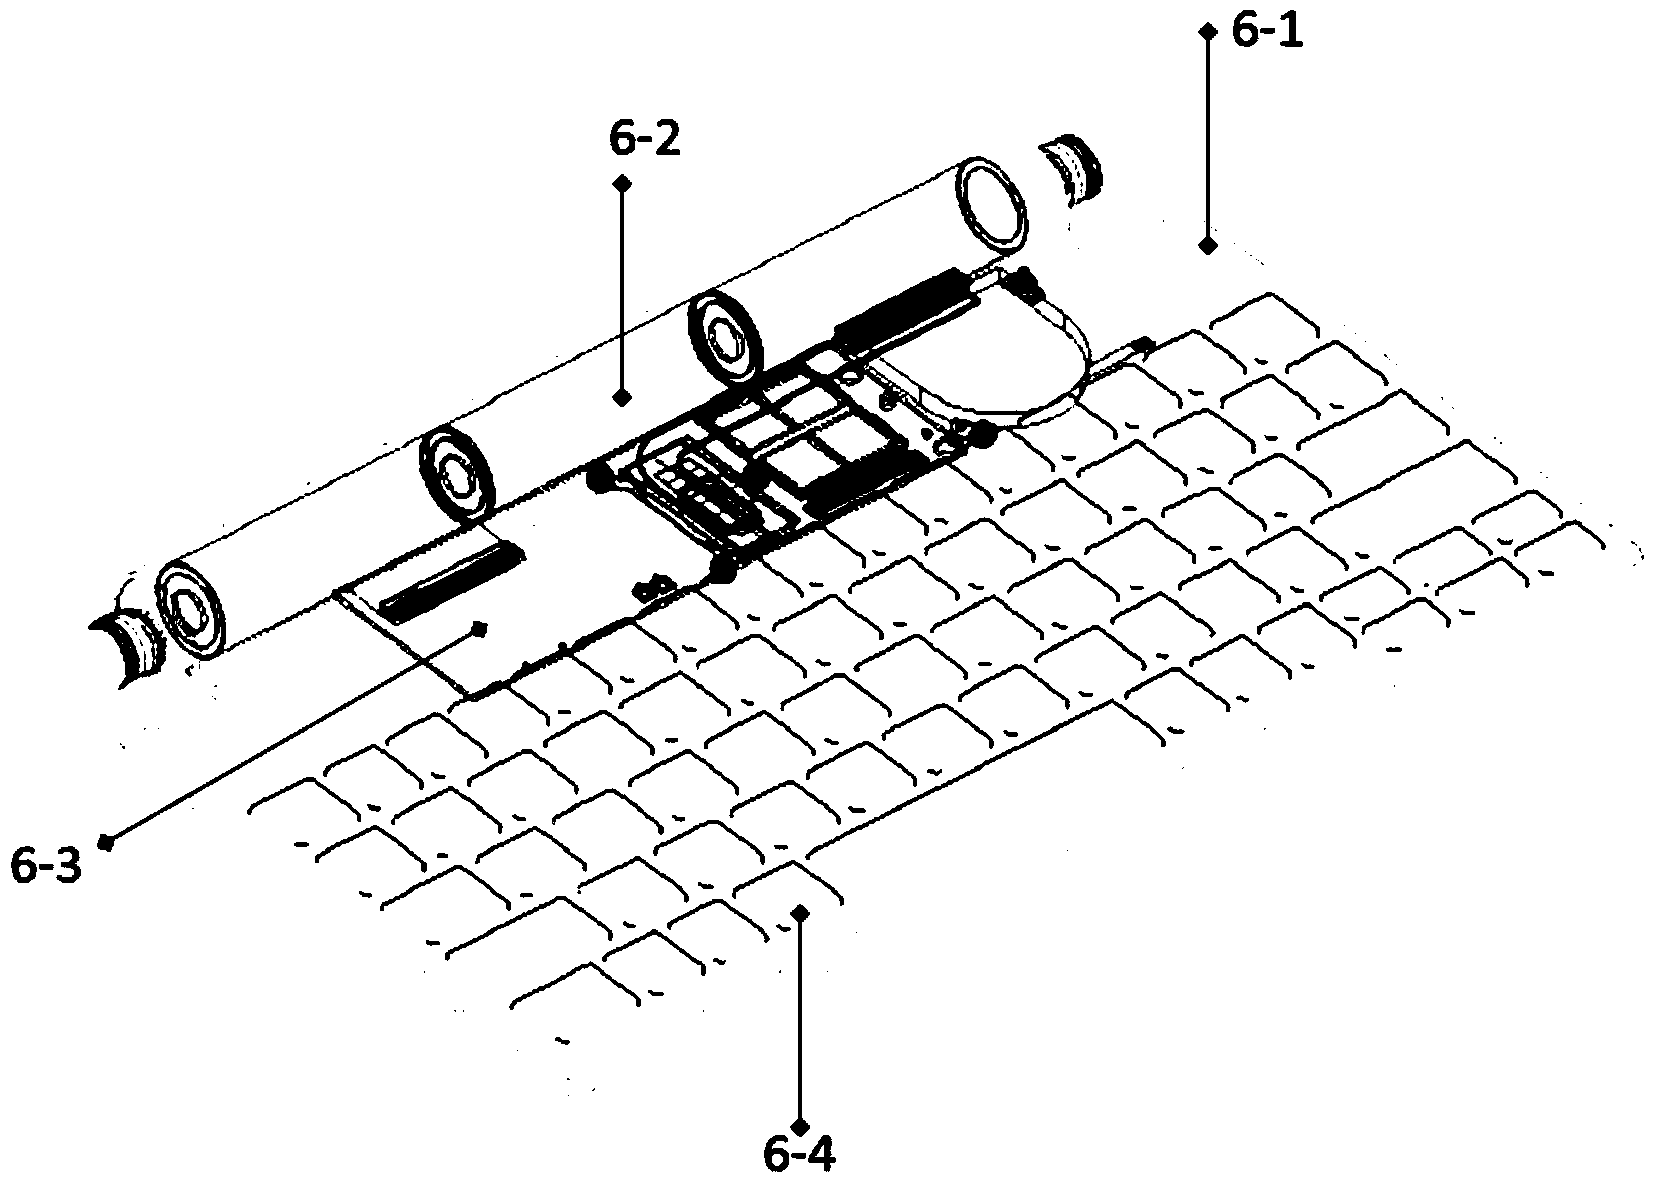 Electronic equipment capable of hiding keyboard